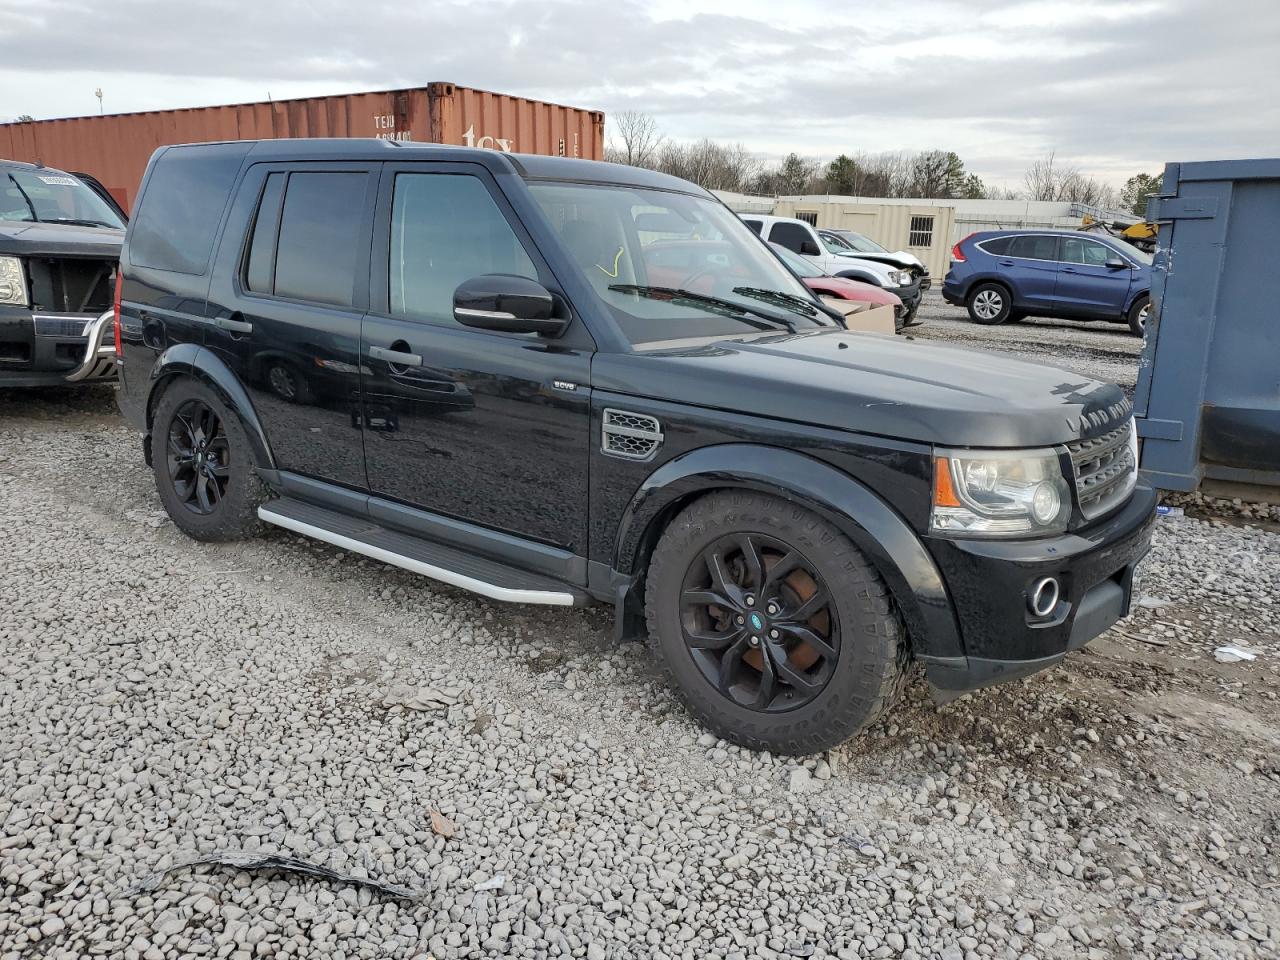 SALAG2V67FA****** Salvage and Wrecked 2015 Land Rover LR4 in Alabama State